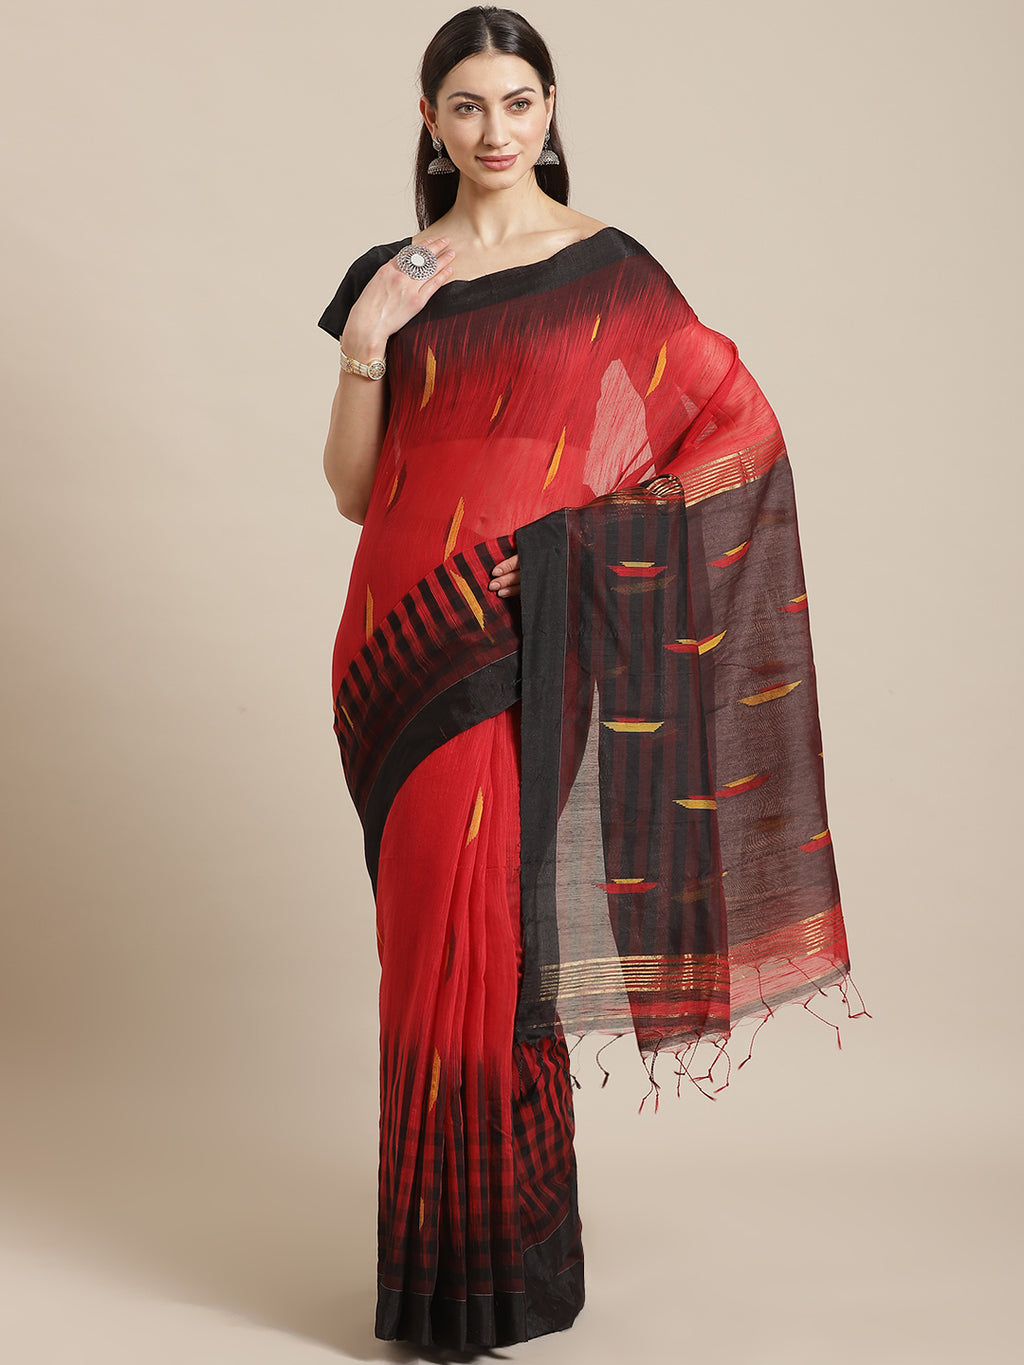 Red and Black, Kalakari India Cotton Silk Red Hand crafted saree with blouse SHBESA0009-Saree-Kalakari India-SHBESA0009-Bengal, Cotton, Geographical Indication, Hand Crafted, Heritage Prints, Ikkat, Natural Dyes, Red, Sarees, Sustainable Fabrics, Woven, Yellow-[Linen,Ethnic,wear,Fashionista,Handloom,Handicraft,Indigo,blockprint,block,print,Cotton,Chanderi,Blue, latest,classy,party,bollywood,trendy,summer,style,traditional,formal,elegant,unique,style,hand,block,print, dabu,booti,gift,present,glam